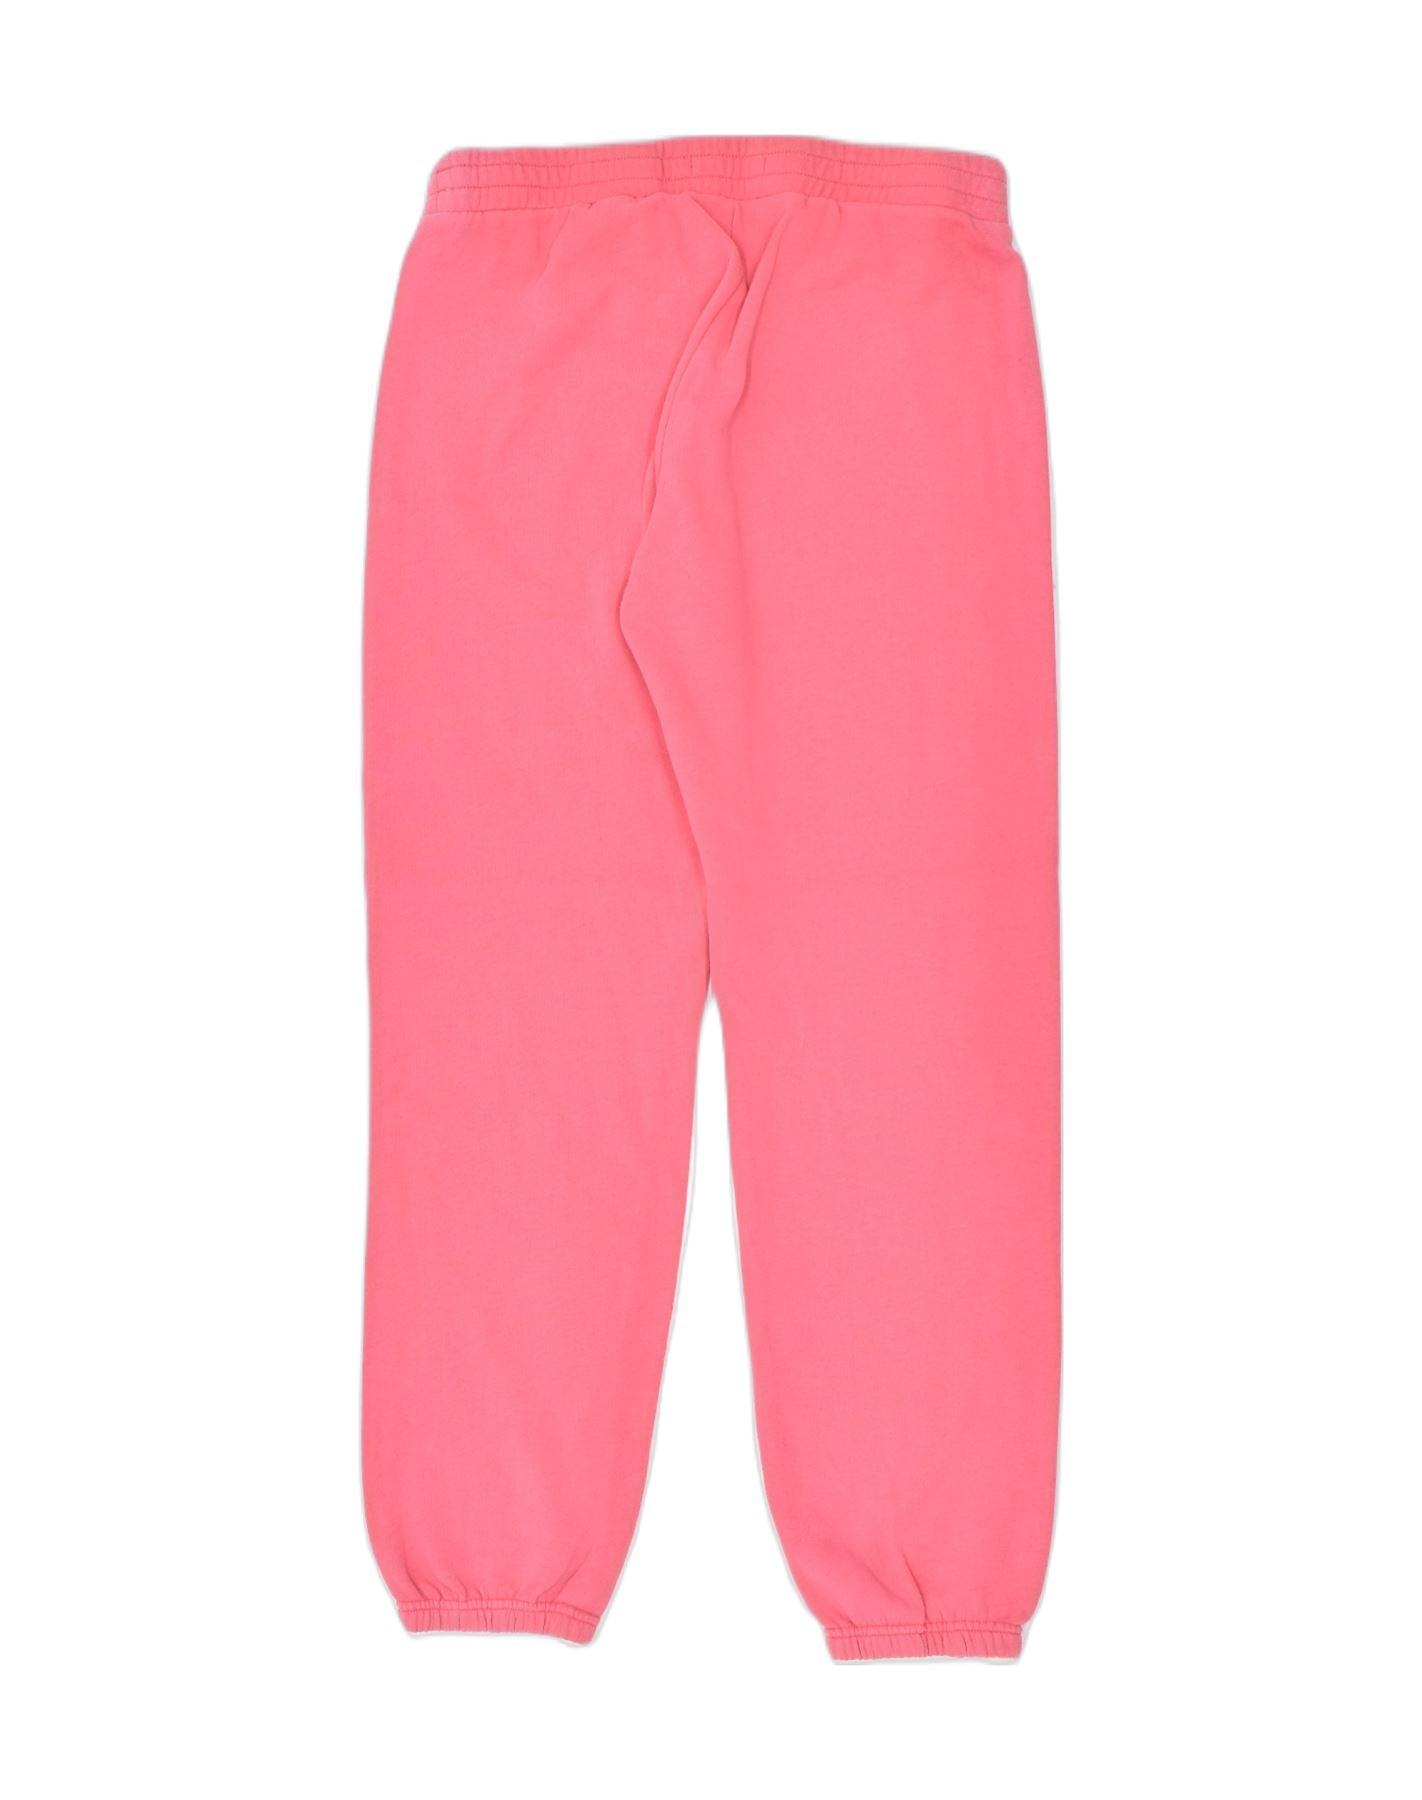 HOLLISTER Womens Tracksuit Trousers Joggers UK 10 Small Pink Cotton, Vintage & Second-Hand Clothing Online